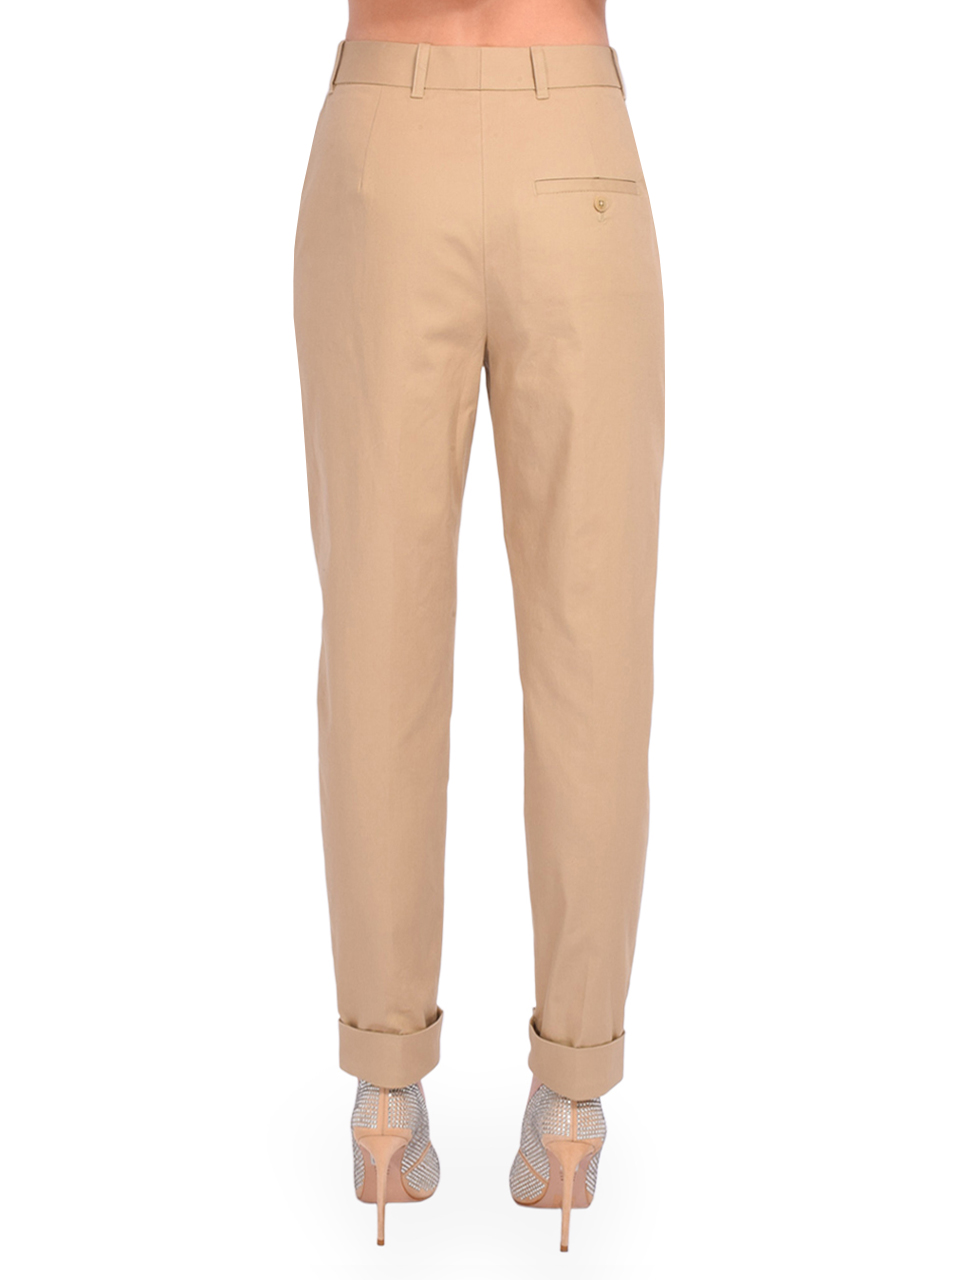 3.1 Phillip Lim Cropped Carrot Trouser in Khaki Back View 

